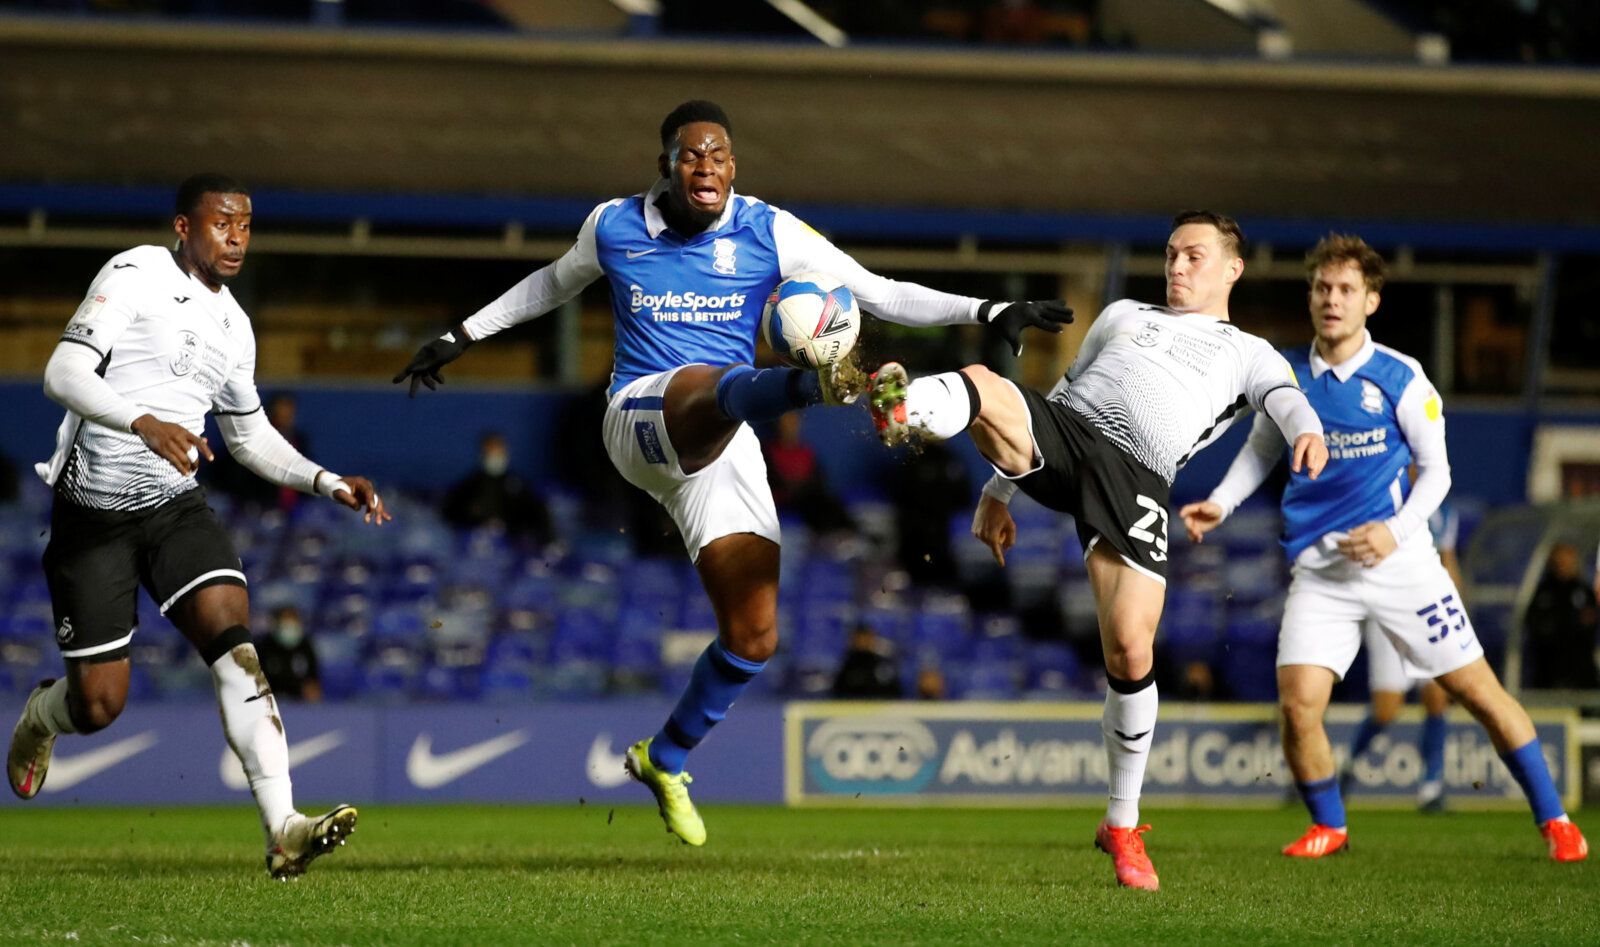 Soccer Football - Championship - Birmingham City v Swansea City - St Andrew's, Birmingham, Britain - April 2, 2021  Swansea City's Connor Roberts concedes a penalty against Birmingham City's Jonathan Leko  Action Images/Andrew Boyers  EDITORIAL USE ONLY. No use with unauthorized audio, video, data, fixture lists, club/league logos or "live" services. Online in-match use limited to 75 images, no video emulation. No use in betting, games or single club/league/player publications.  Please contact y